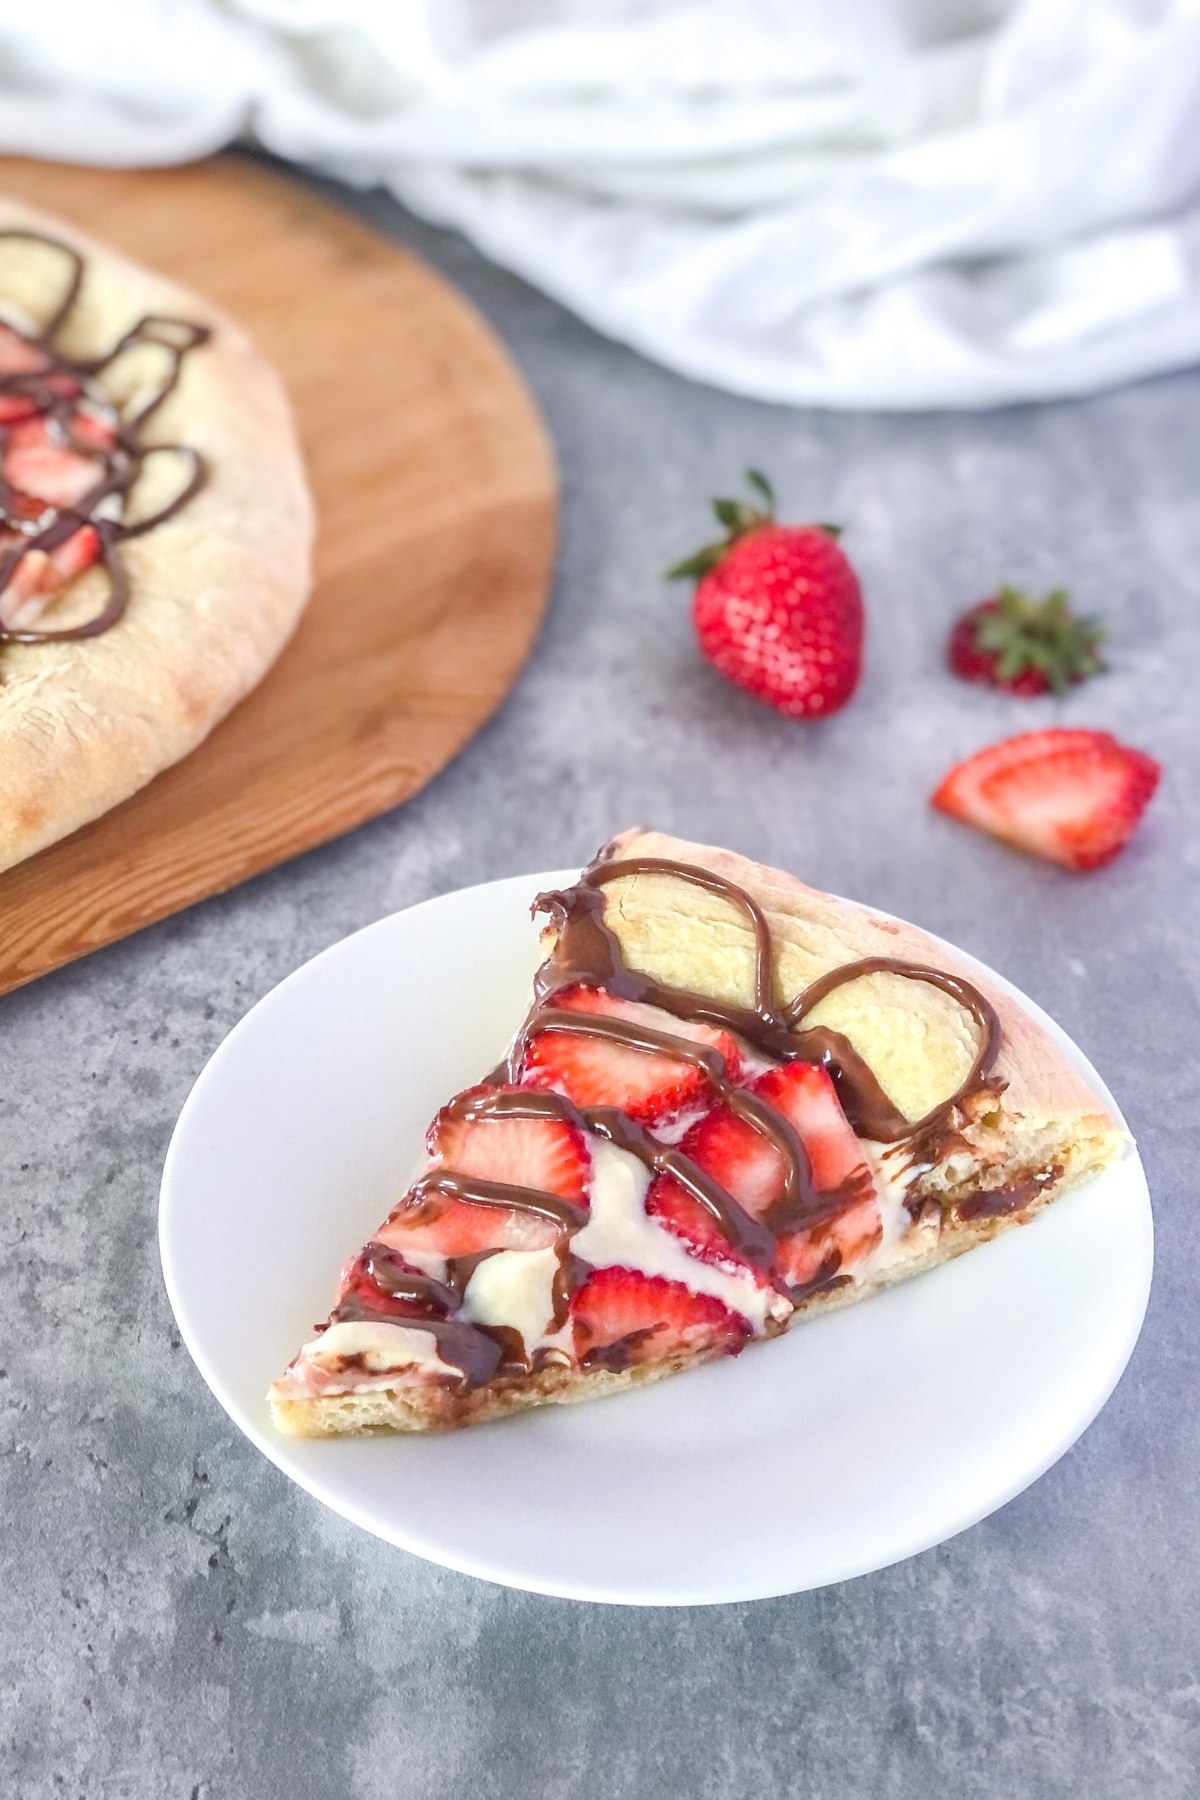 slice of Nutella dessert pizza with strawberries